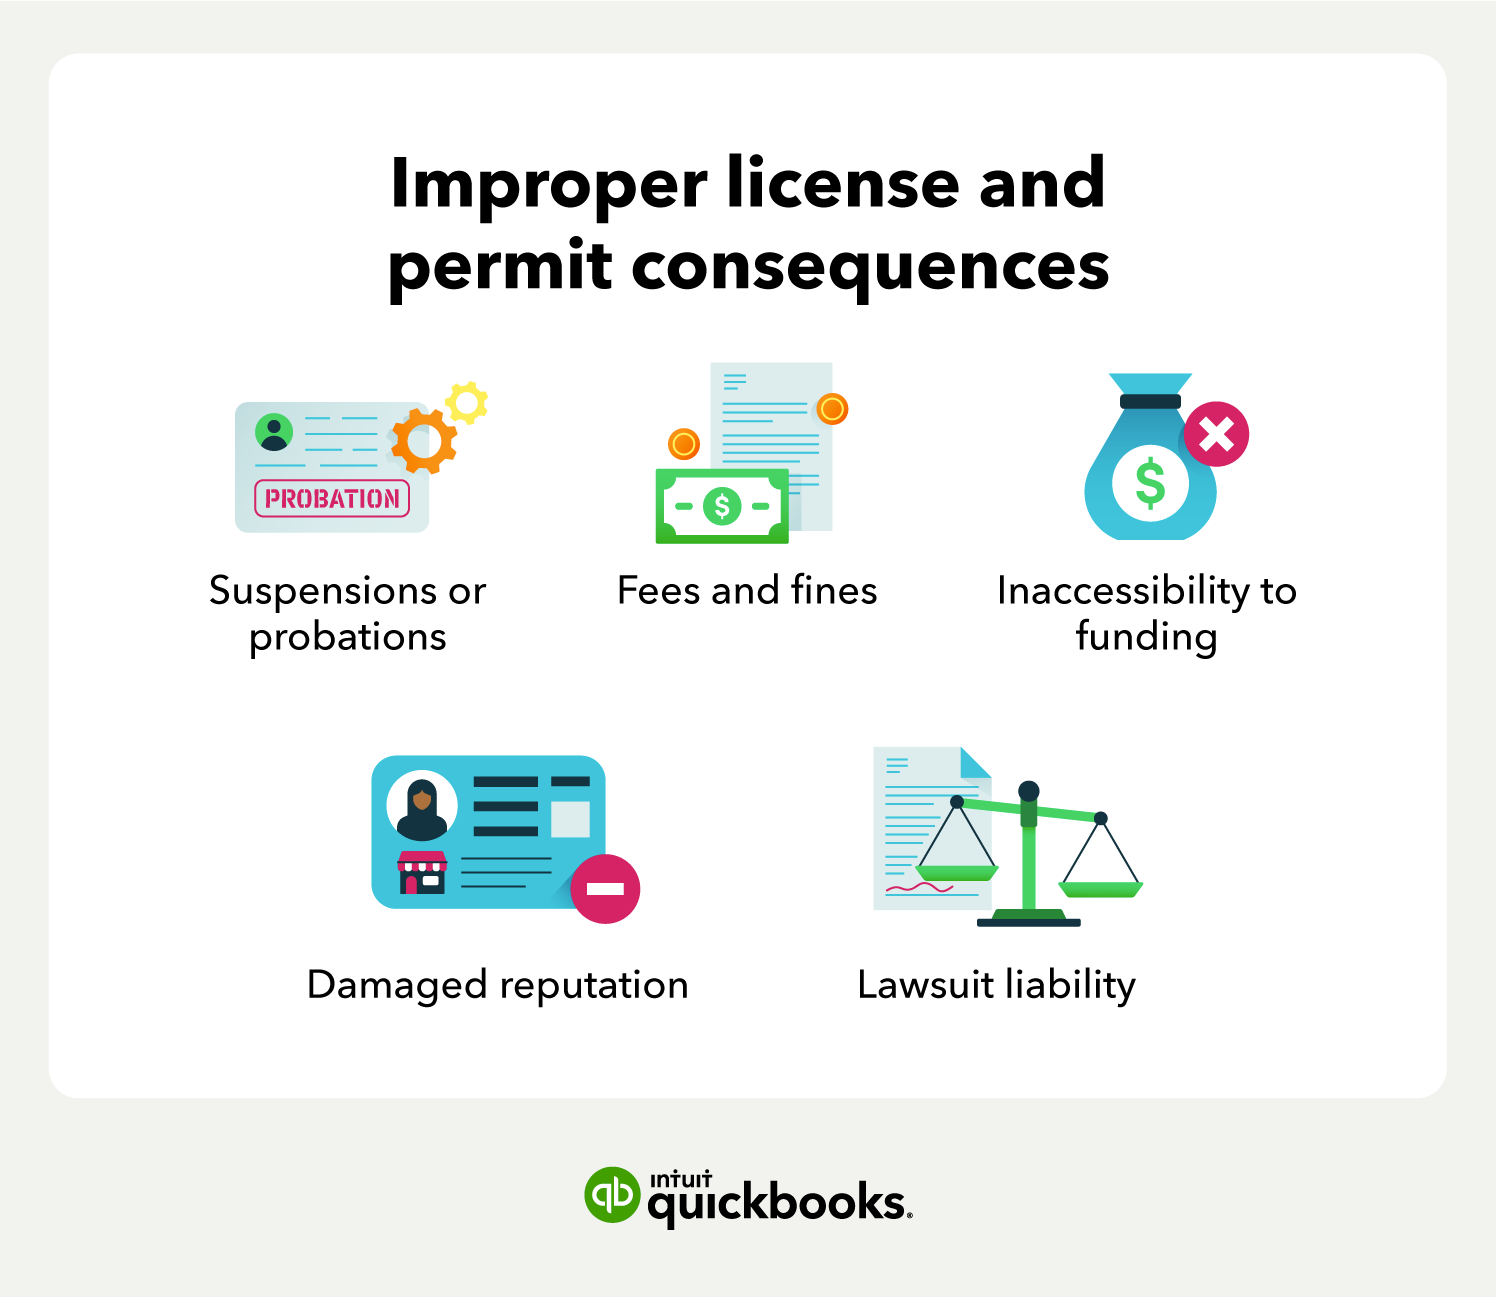 The 5 types of improper license and permit consequences are listed.